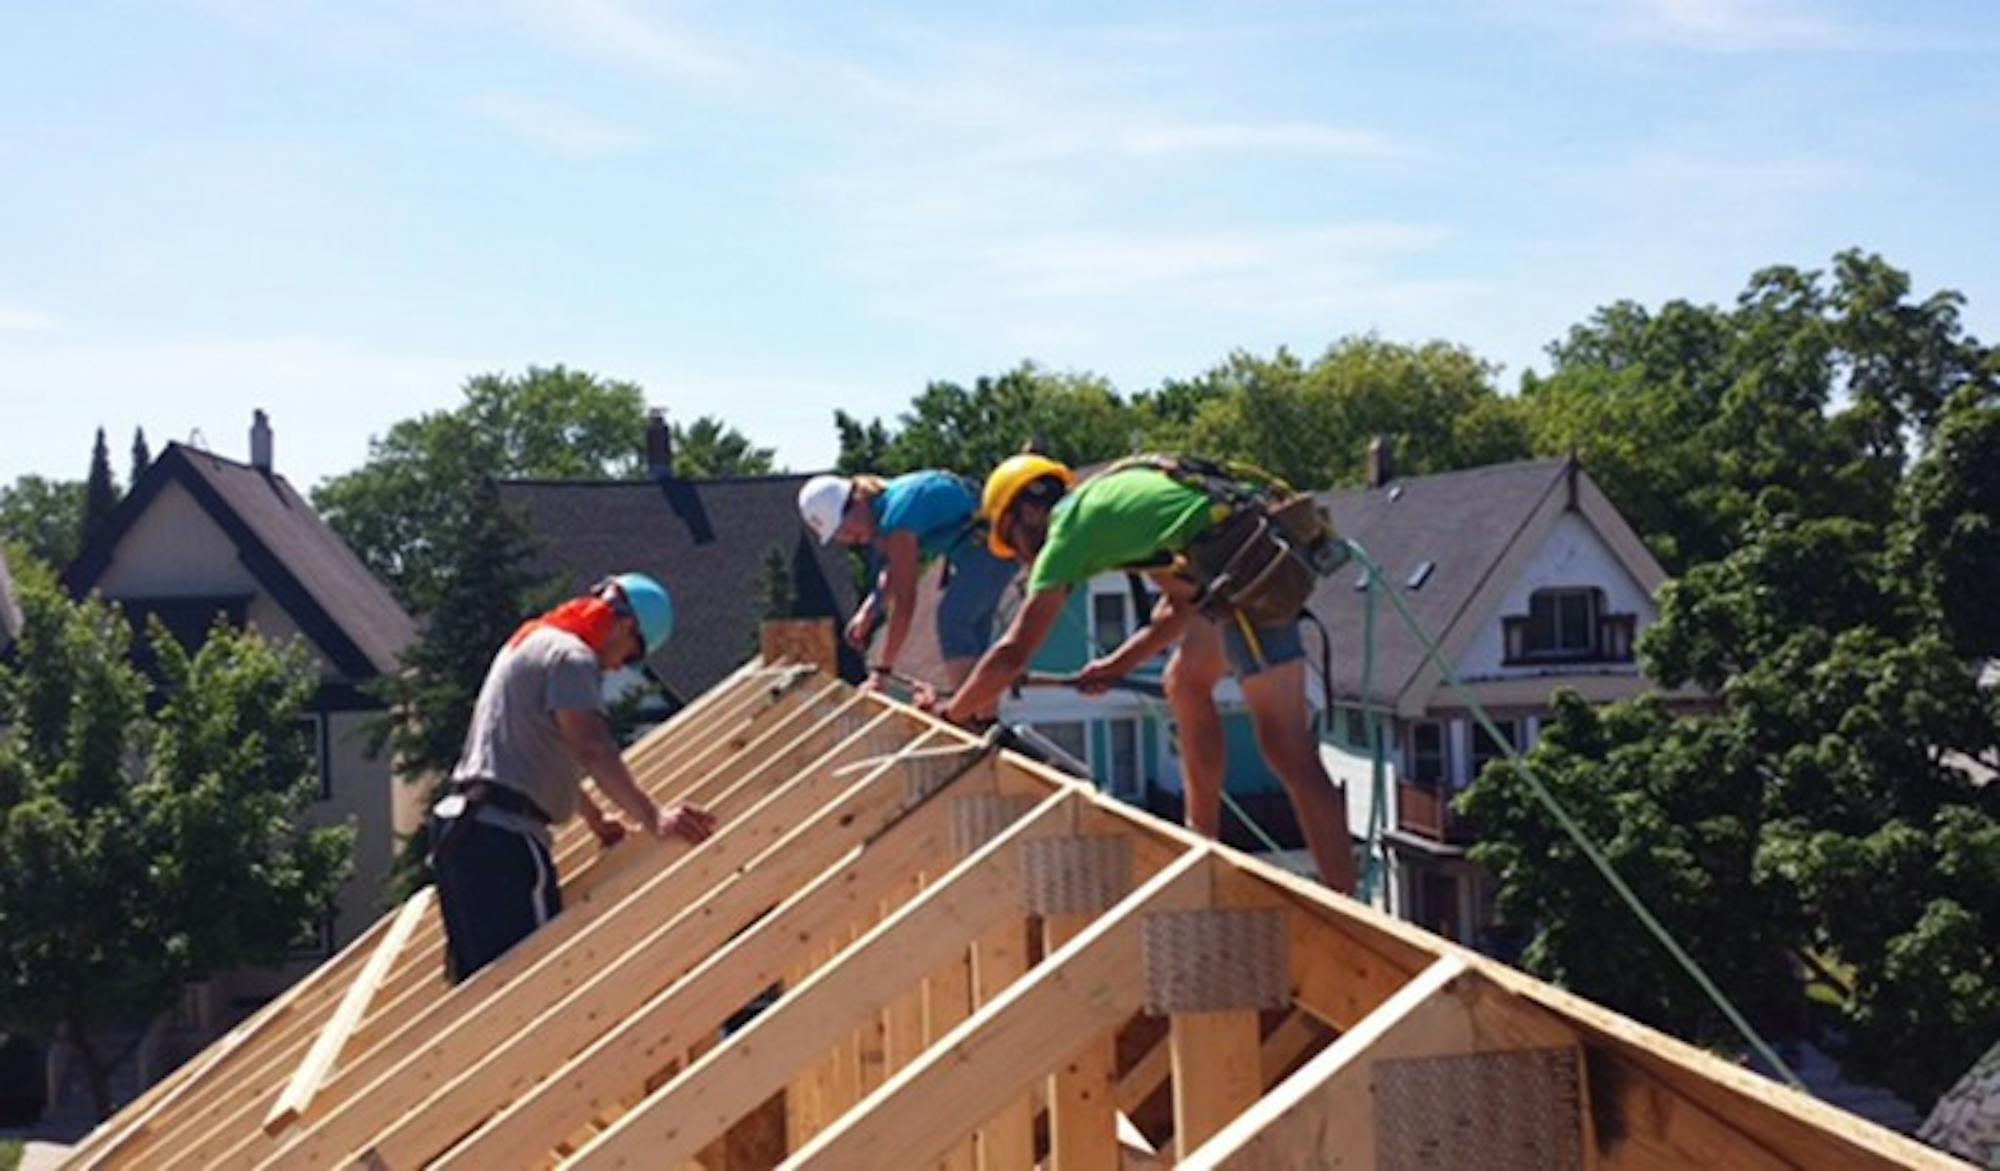 Sophomore Brittany Margritz works on a construction project in Milwaukee over the summer. Margritz volunteered for Habitat for Humanity, part of her SSLP sponsored by the University.